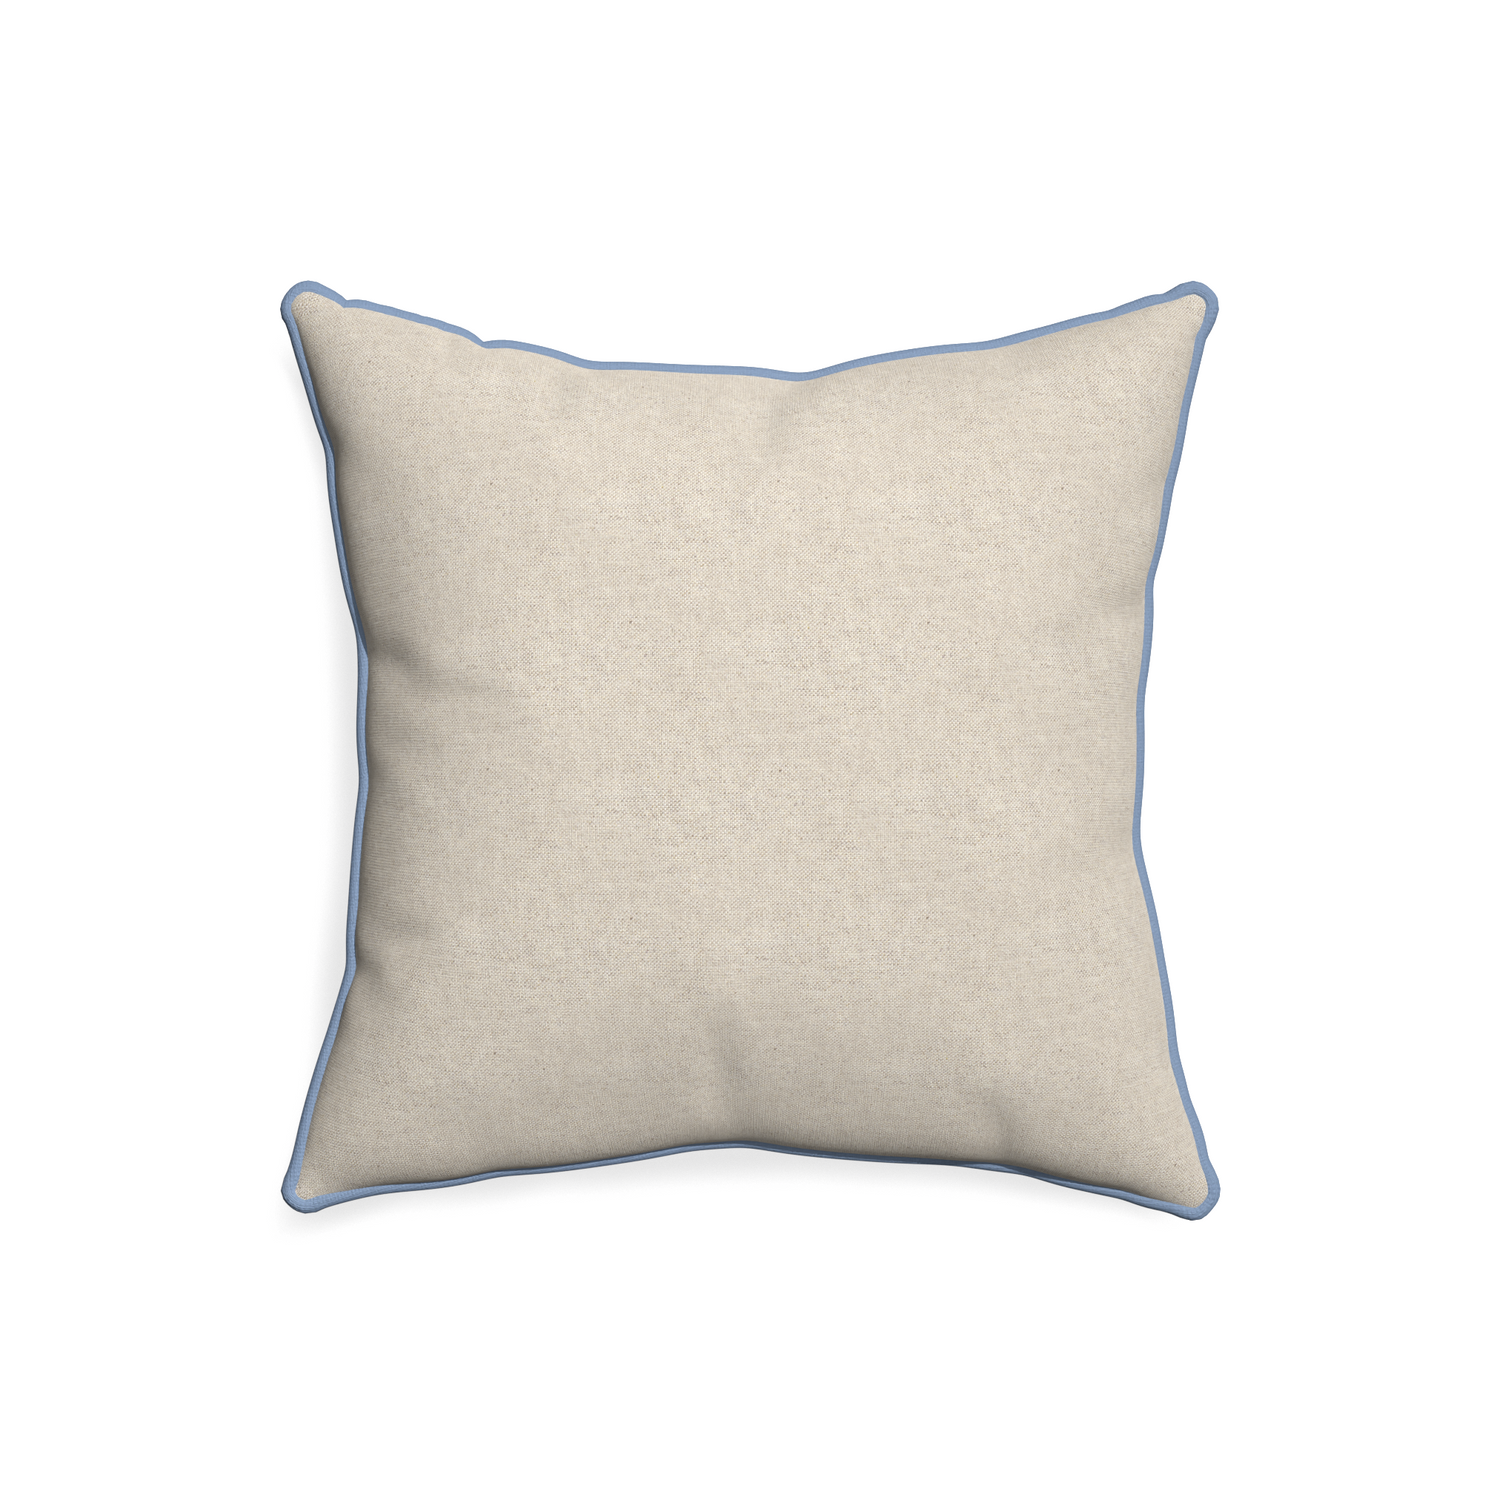 20-square oat custom light brownpillow with sky piping on white background